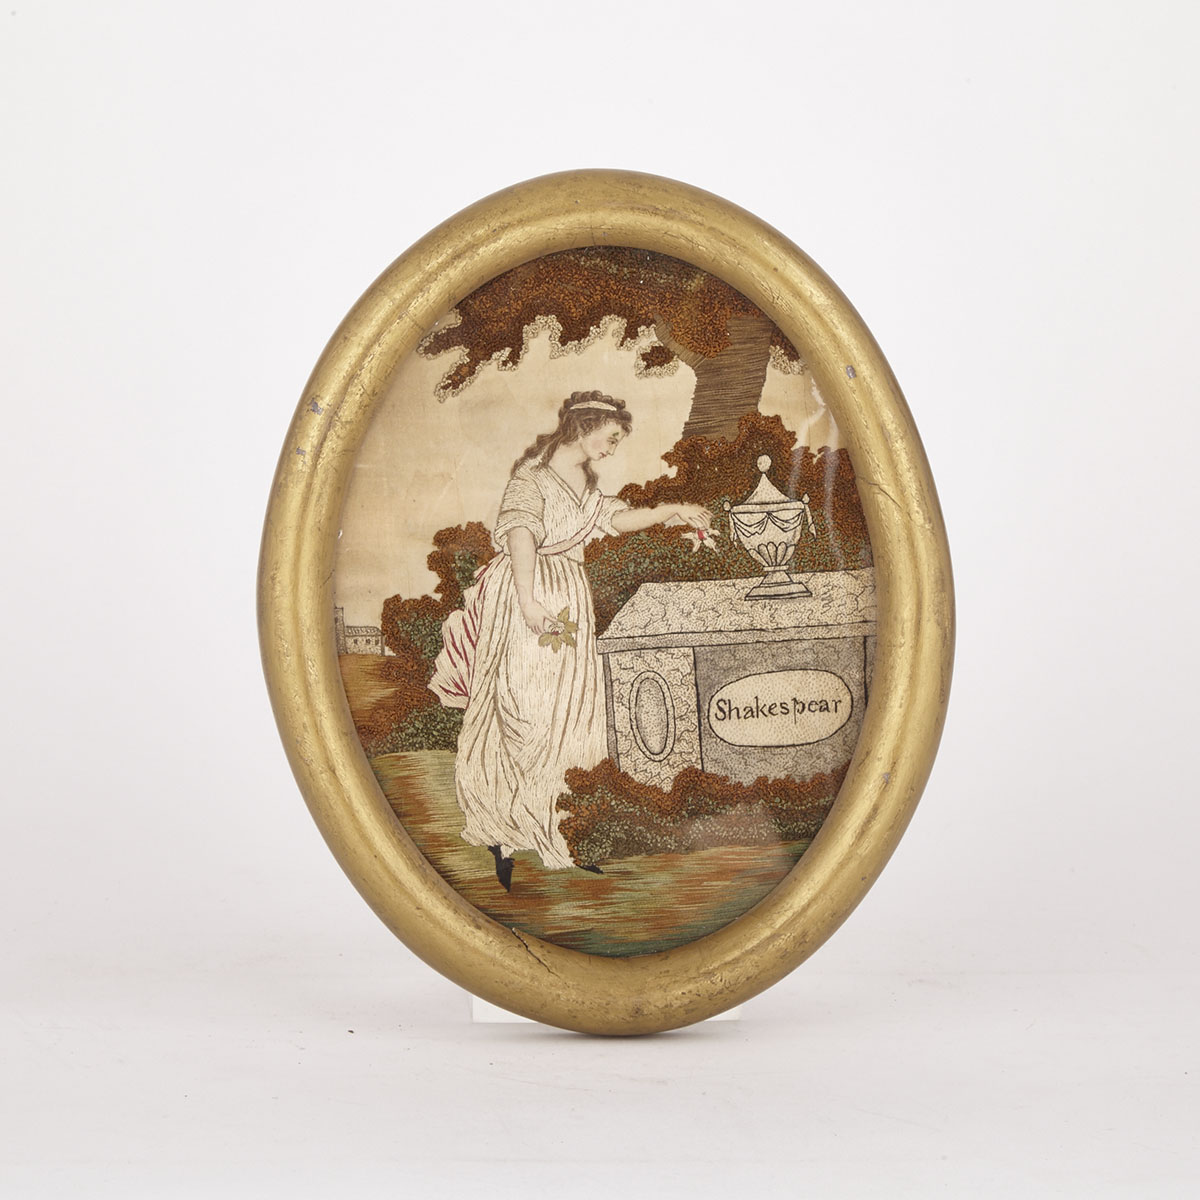 Georgian Oval Silk Needlework Picture of Fame Adoring Shakespeare’s Tomb, c.1800